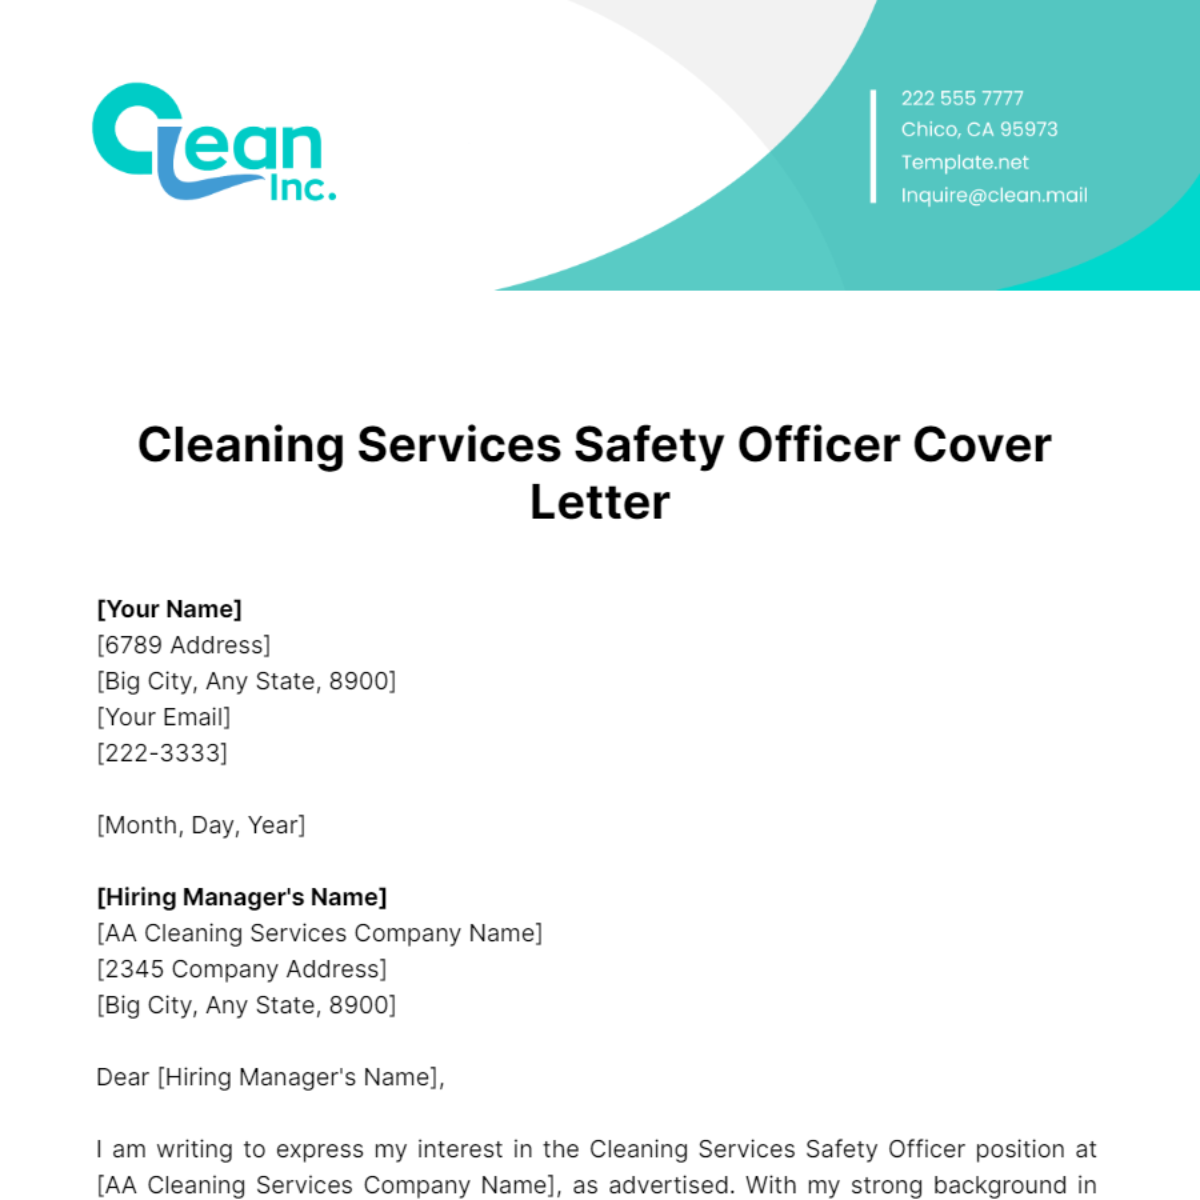 Cleaning Services Safety Officer Cover Letter Template